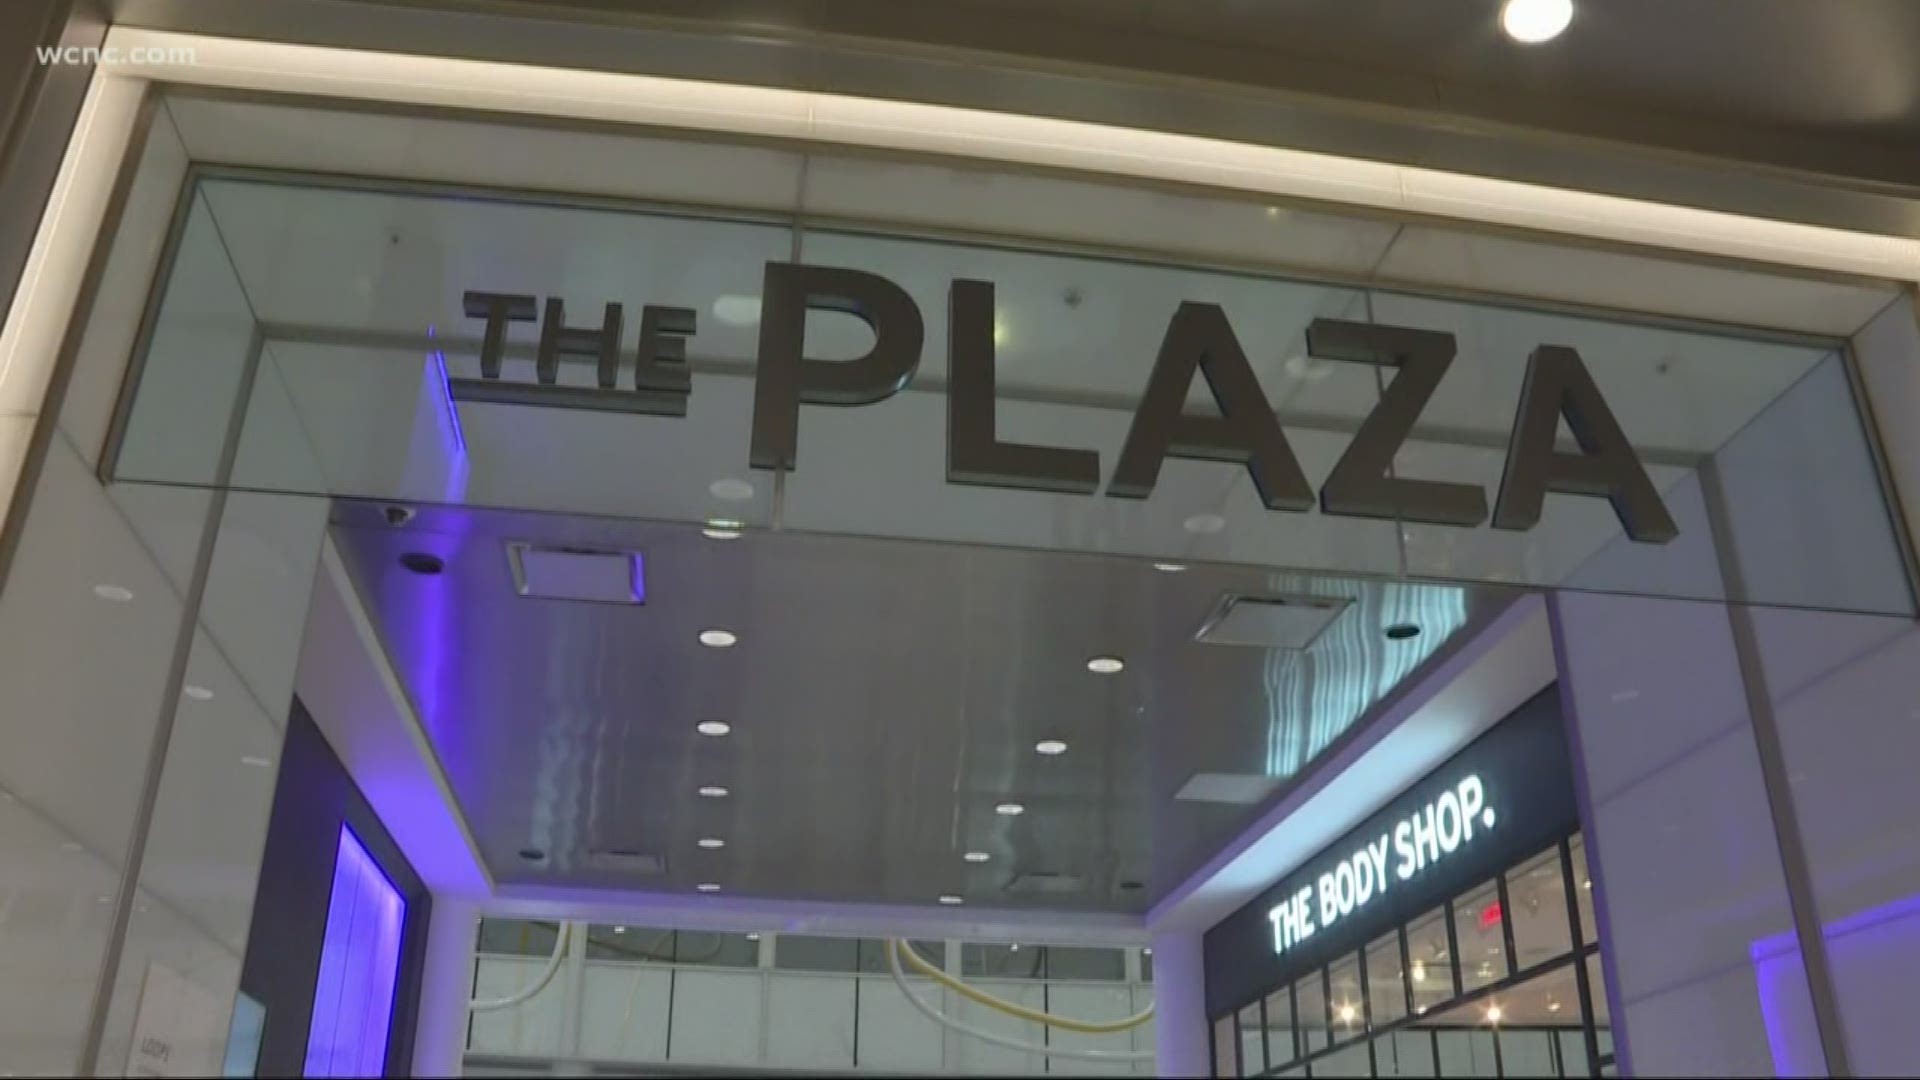 According to the airport, the area is between terminals D and E and will be known as the 'Plaza.'